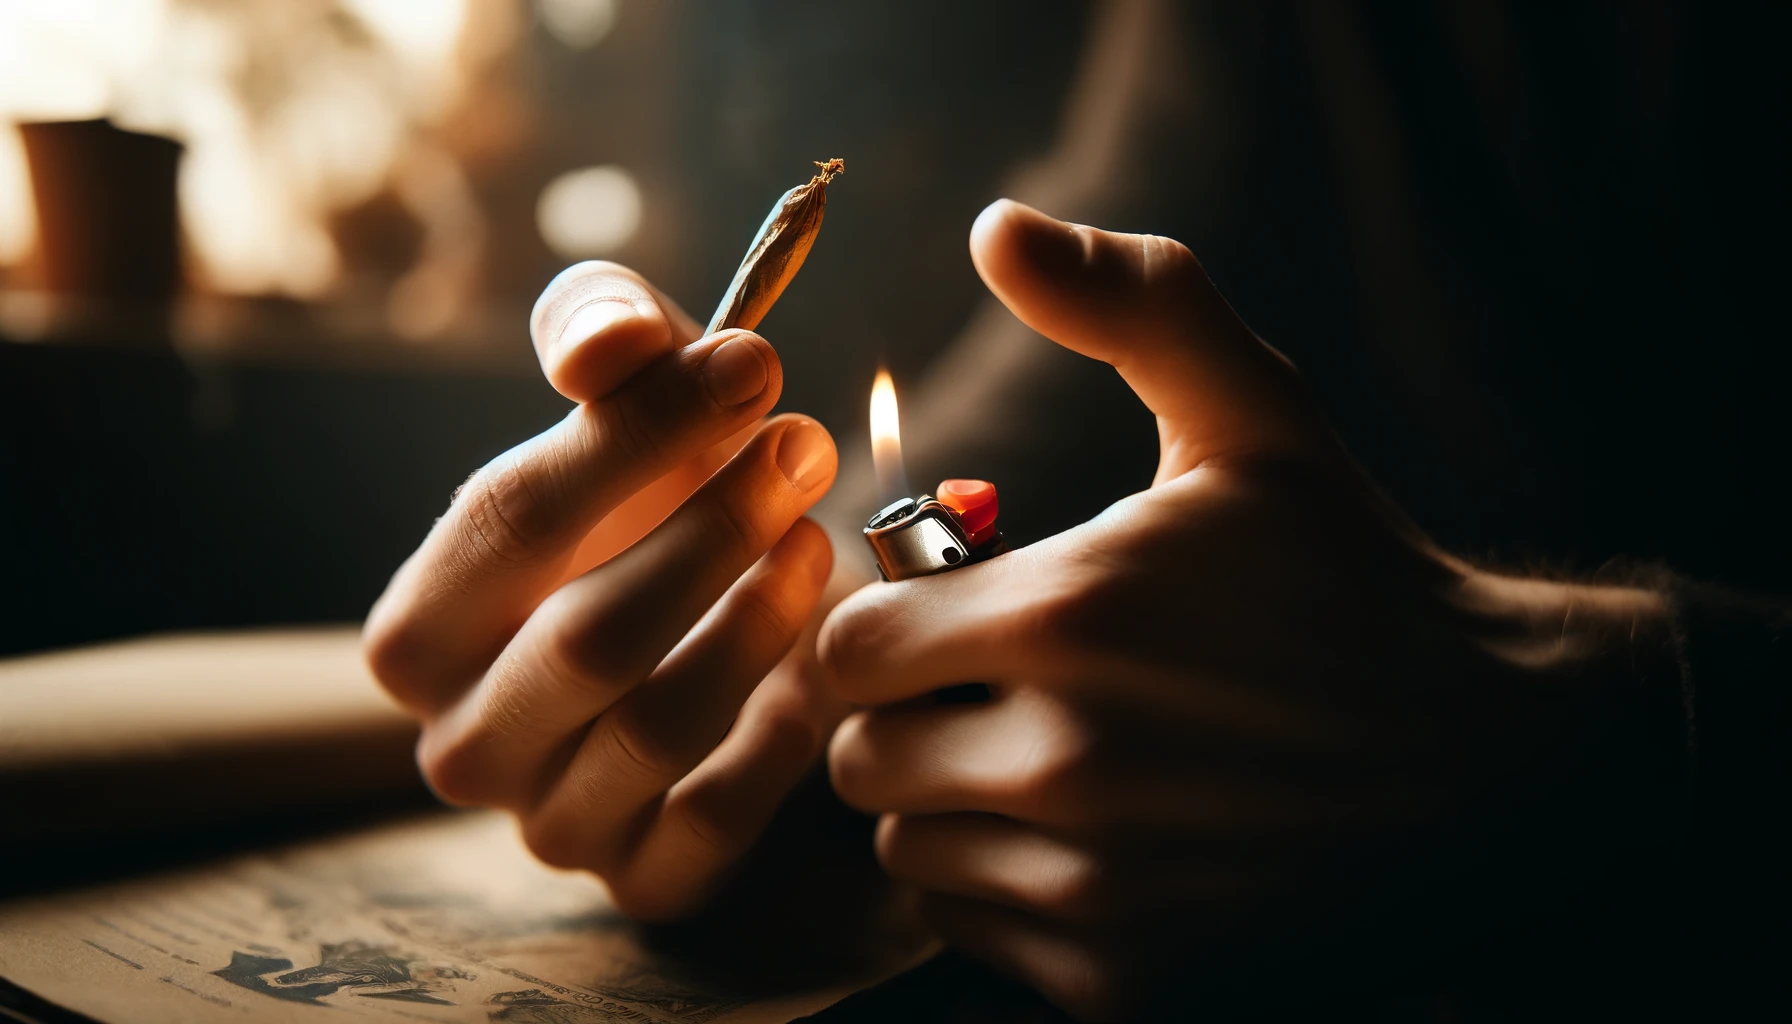 DALL·E 2024-04-25 14.41.49 - An image featuring a person's hands close up. One hand is holding a small, hand-rolled cigarette, the other hand is holding a lighter and is in the ac